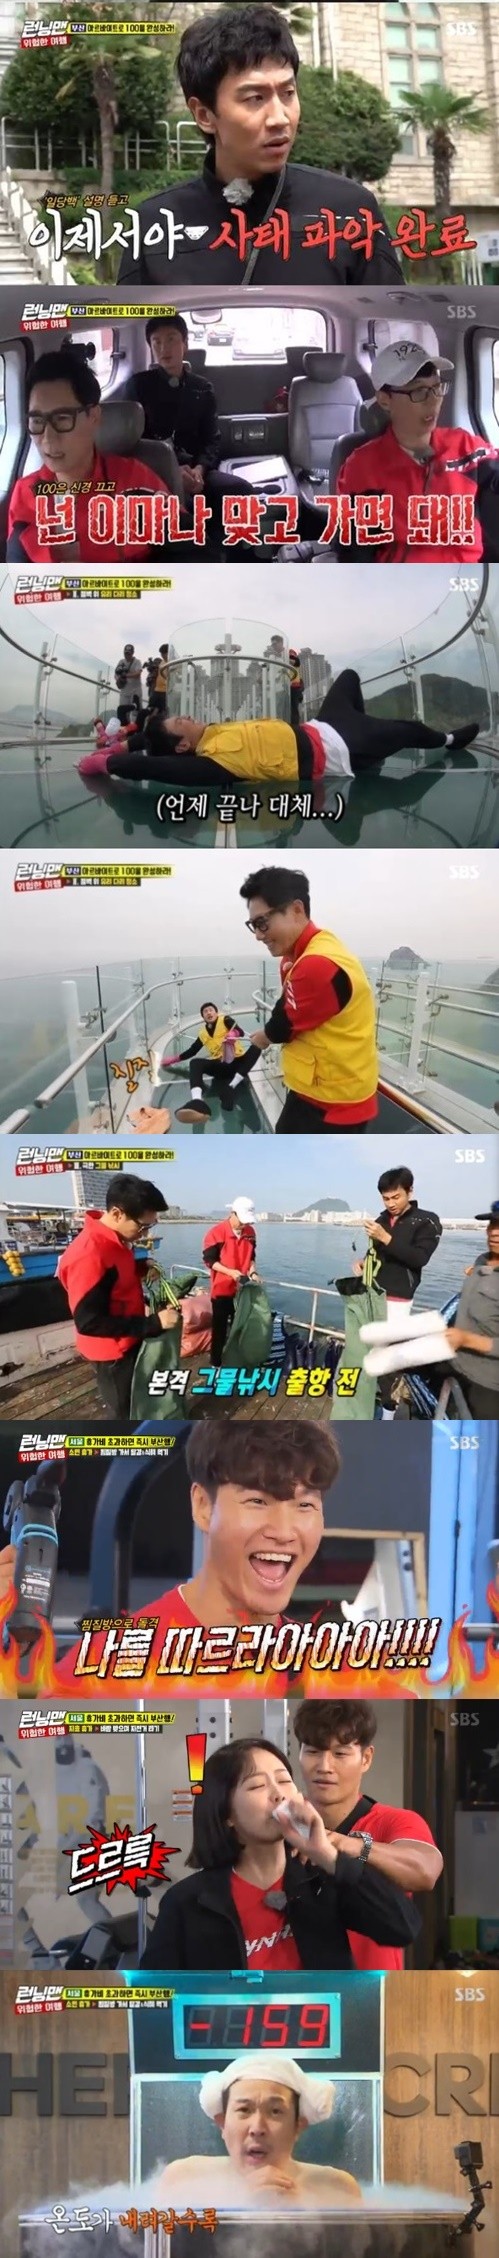 SBS Running Man, which is decorated with dangerous travel specials, recorded the highest audience rating per minute up to 9%.According to Nielsen Korea, the ratings agency Running Man, which was broadcast on September 30, recorded 5.7% of target audience ratings (based on households in the metropolitan area) between 20 and 49 years old (hereinafter referred to as 2049), which is an important indicator of major advertising officials, and took the top spot in the same time zone, surpassing Happy Sunday and Masked Wang.The average audience rating was 5.2% in the first part and 7.9% in the second part, and the highest audience rating per minute jumped to 9%.The broadcast was featured in the Dangerous Travel feature, revealing the content of comedians Yoo Jae-Suk, Ji Suk-jin and Lee Kwang-soo being subject to a one-on-one penalty at Busan.Yoo Jae-Suk, who had to fill the number 100 through the Alba penalty, suddenly summoned Lee Kwang-soo to Busan, saying, I have to go ahead with two foreheads now. Lee Kwang-soo actually arrived at Busan and laughed.However, Yoo Jae-Suk refused to hit his forehead, and he showed the end of the Kanjok by conducting an Alba penalty with Lee Kwang-soo.Eventually, the three people cleaned 24 Kwon Yuri in Oryukdo Skywalk, and Lee Kwang-soo, in particular, took the most difficult Kwon Yuri cleaning and played an icon of bad luck.The scene of the highest audience rating per minute was setting the net fishing fish.The three people who came to Marina started to decide the fish by throwing shoes, and this scene soared to 9% and took the best one minute.Meanwhile, other members decided to enjoy vacations in Seoul, but they had to limit the amount of money they spent on vacation to less than 50,000 won.Song Ji-hyo suggested bicycle riding in the Han River wind, Jeon So-min suggested calculation and eating sikhye in the jjimjilbang, and Kim Jong-kook took the members to the gym and surprised them.Kim Jong-kook also introduced his own cold-drying demonstration, saying, I will introduce a new steaming, while guiding members on bicycles.The members were surprised that it has been a long time since I was so happy.